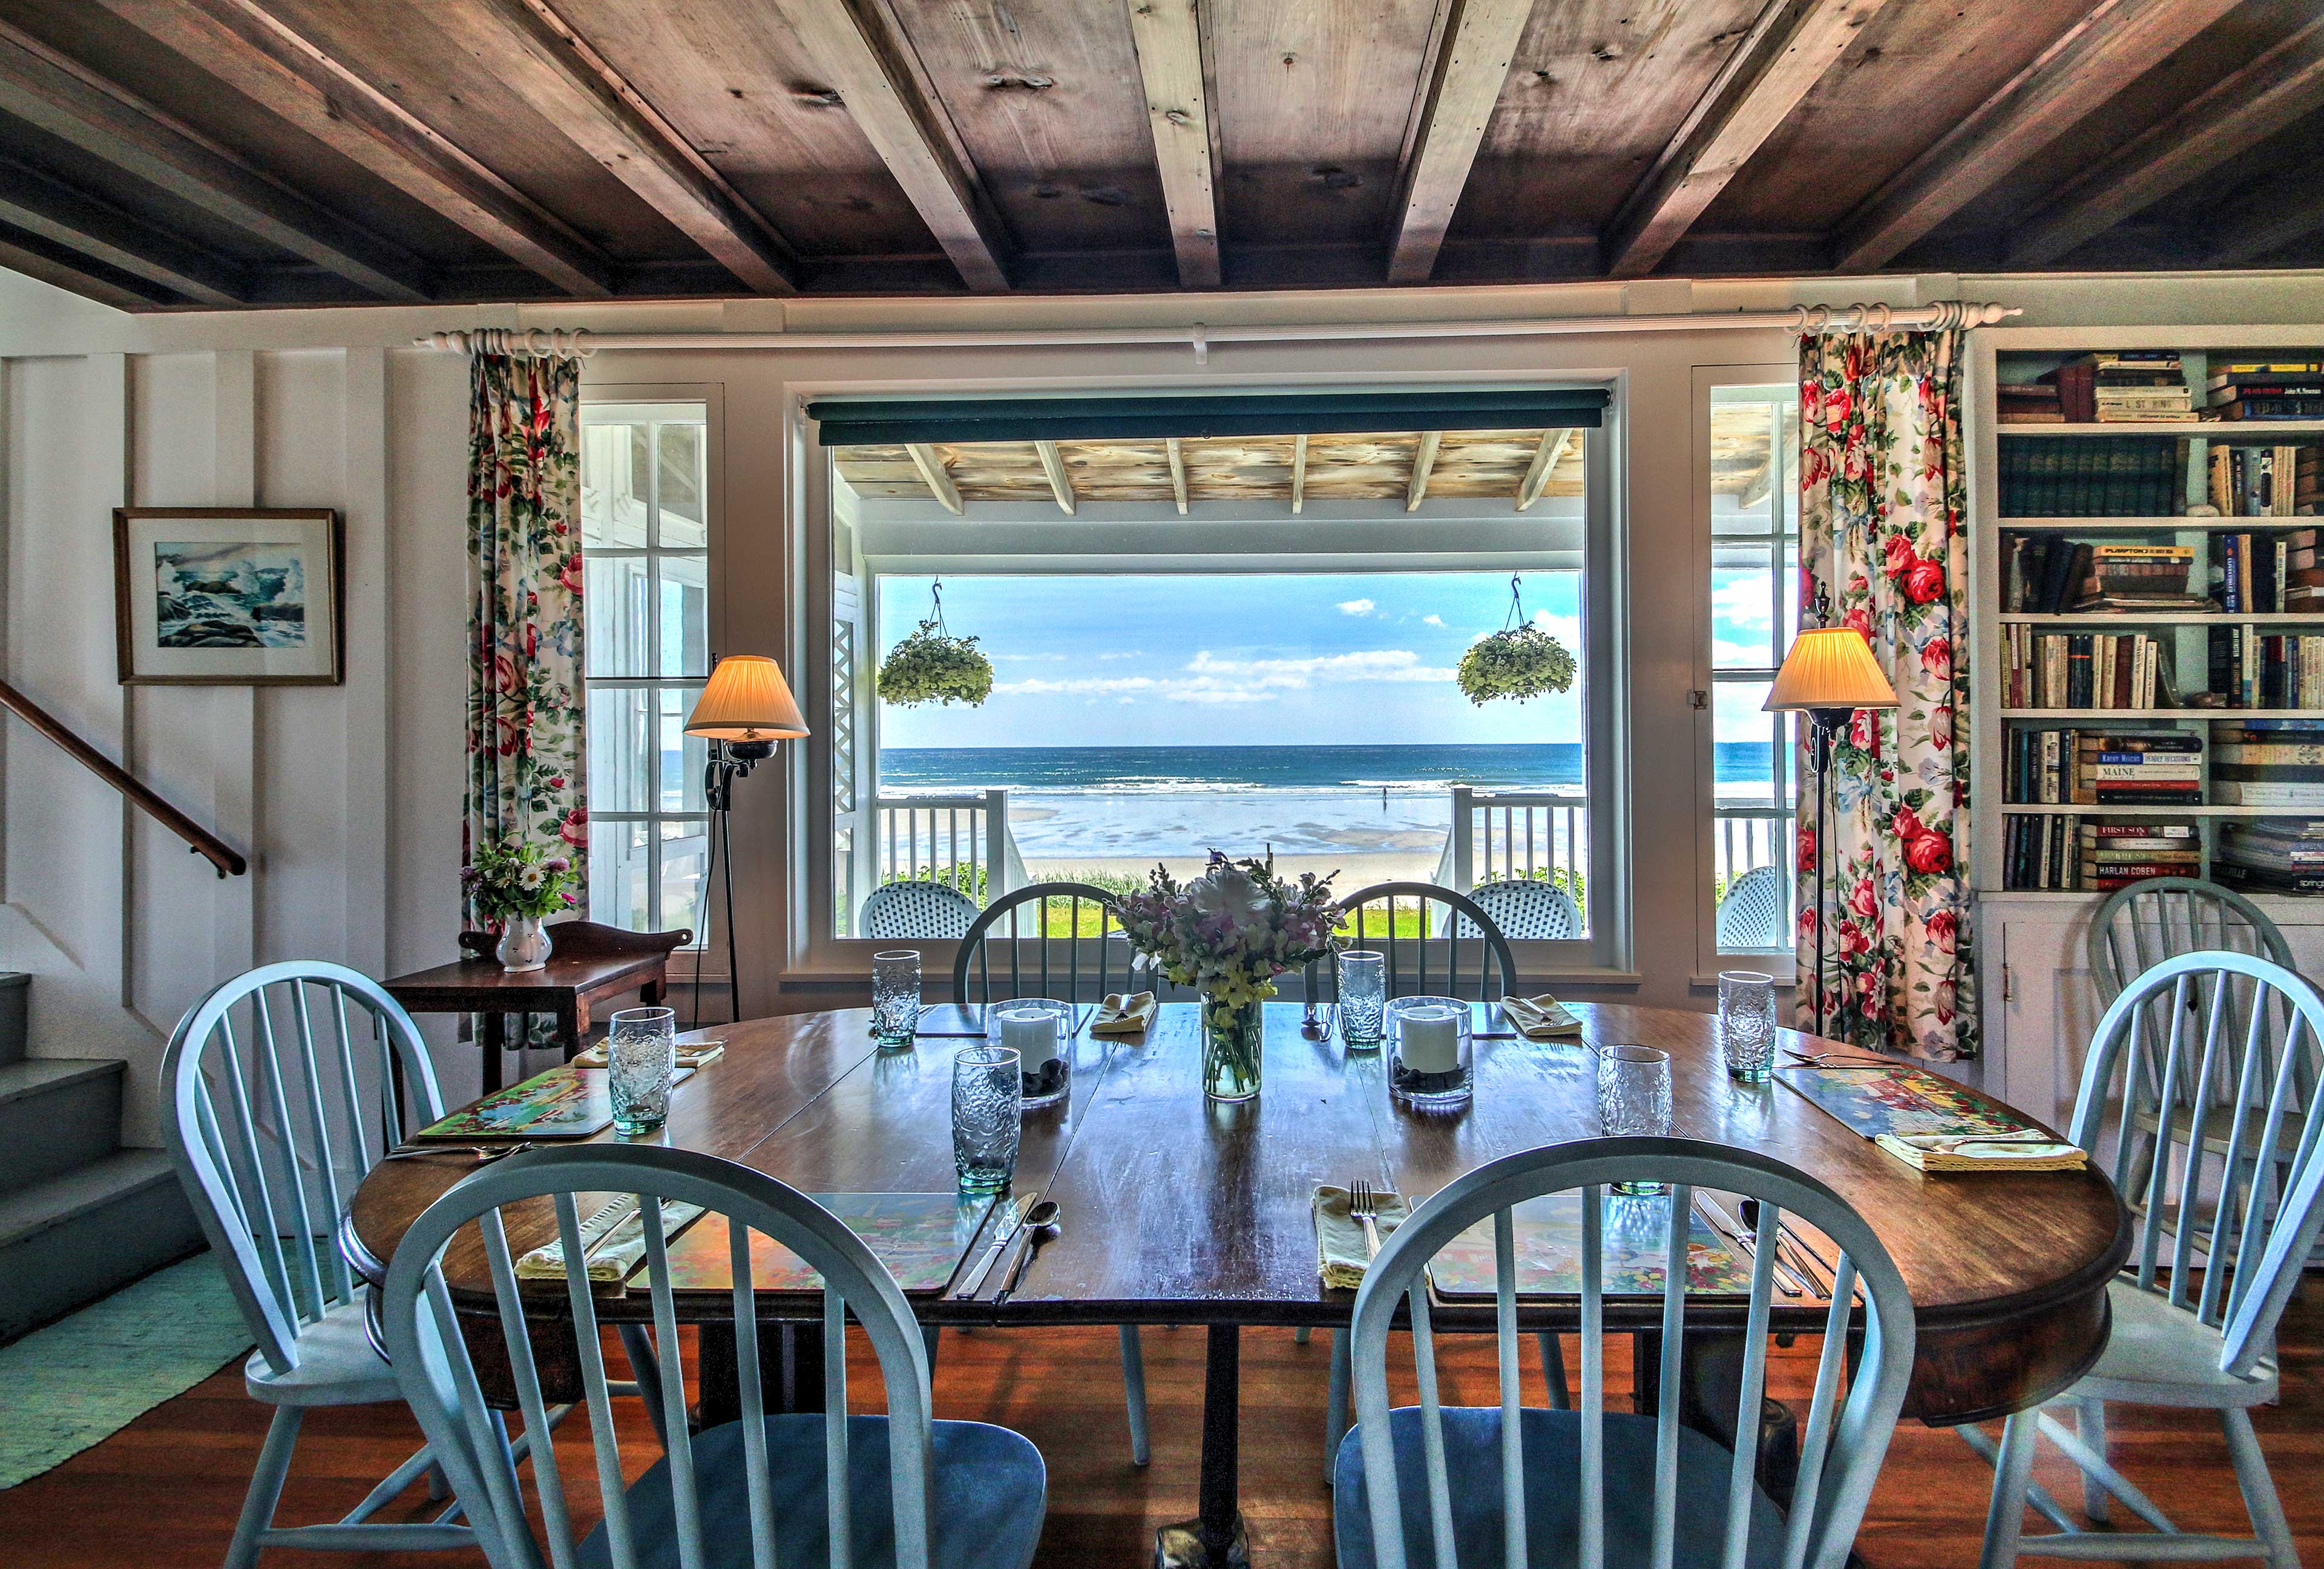 Savor home-cooked meals at the dining table beside breathtaking ocean views.